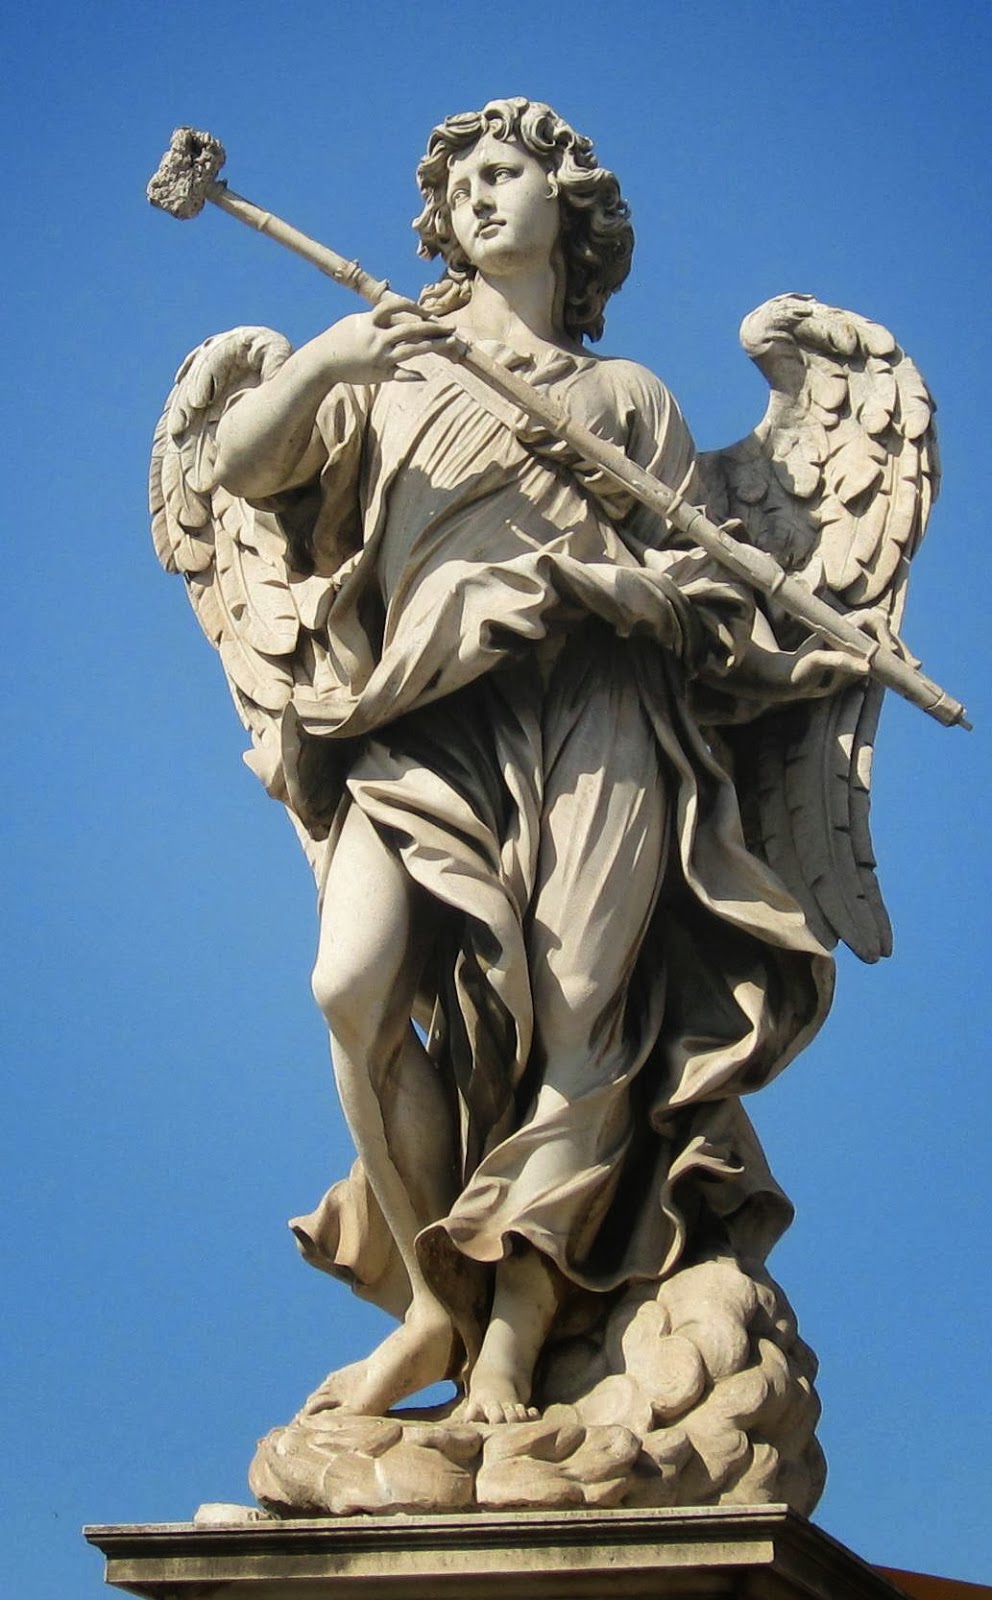 Rome From Home: Angels From the Realms of Glory